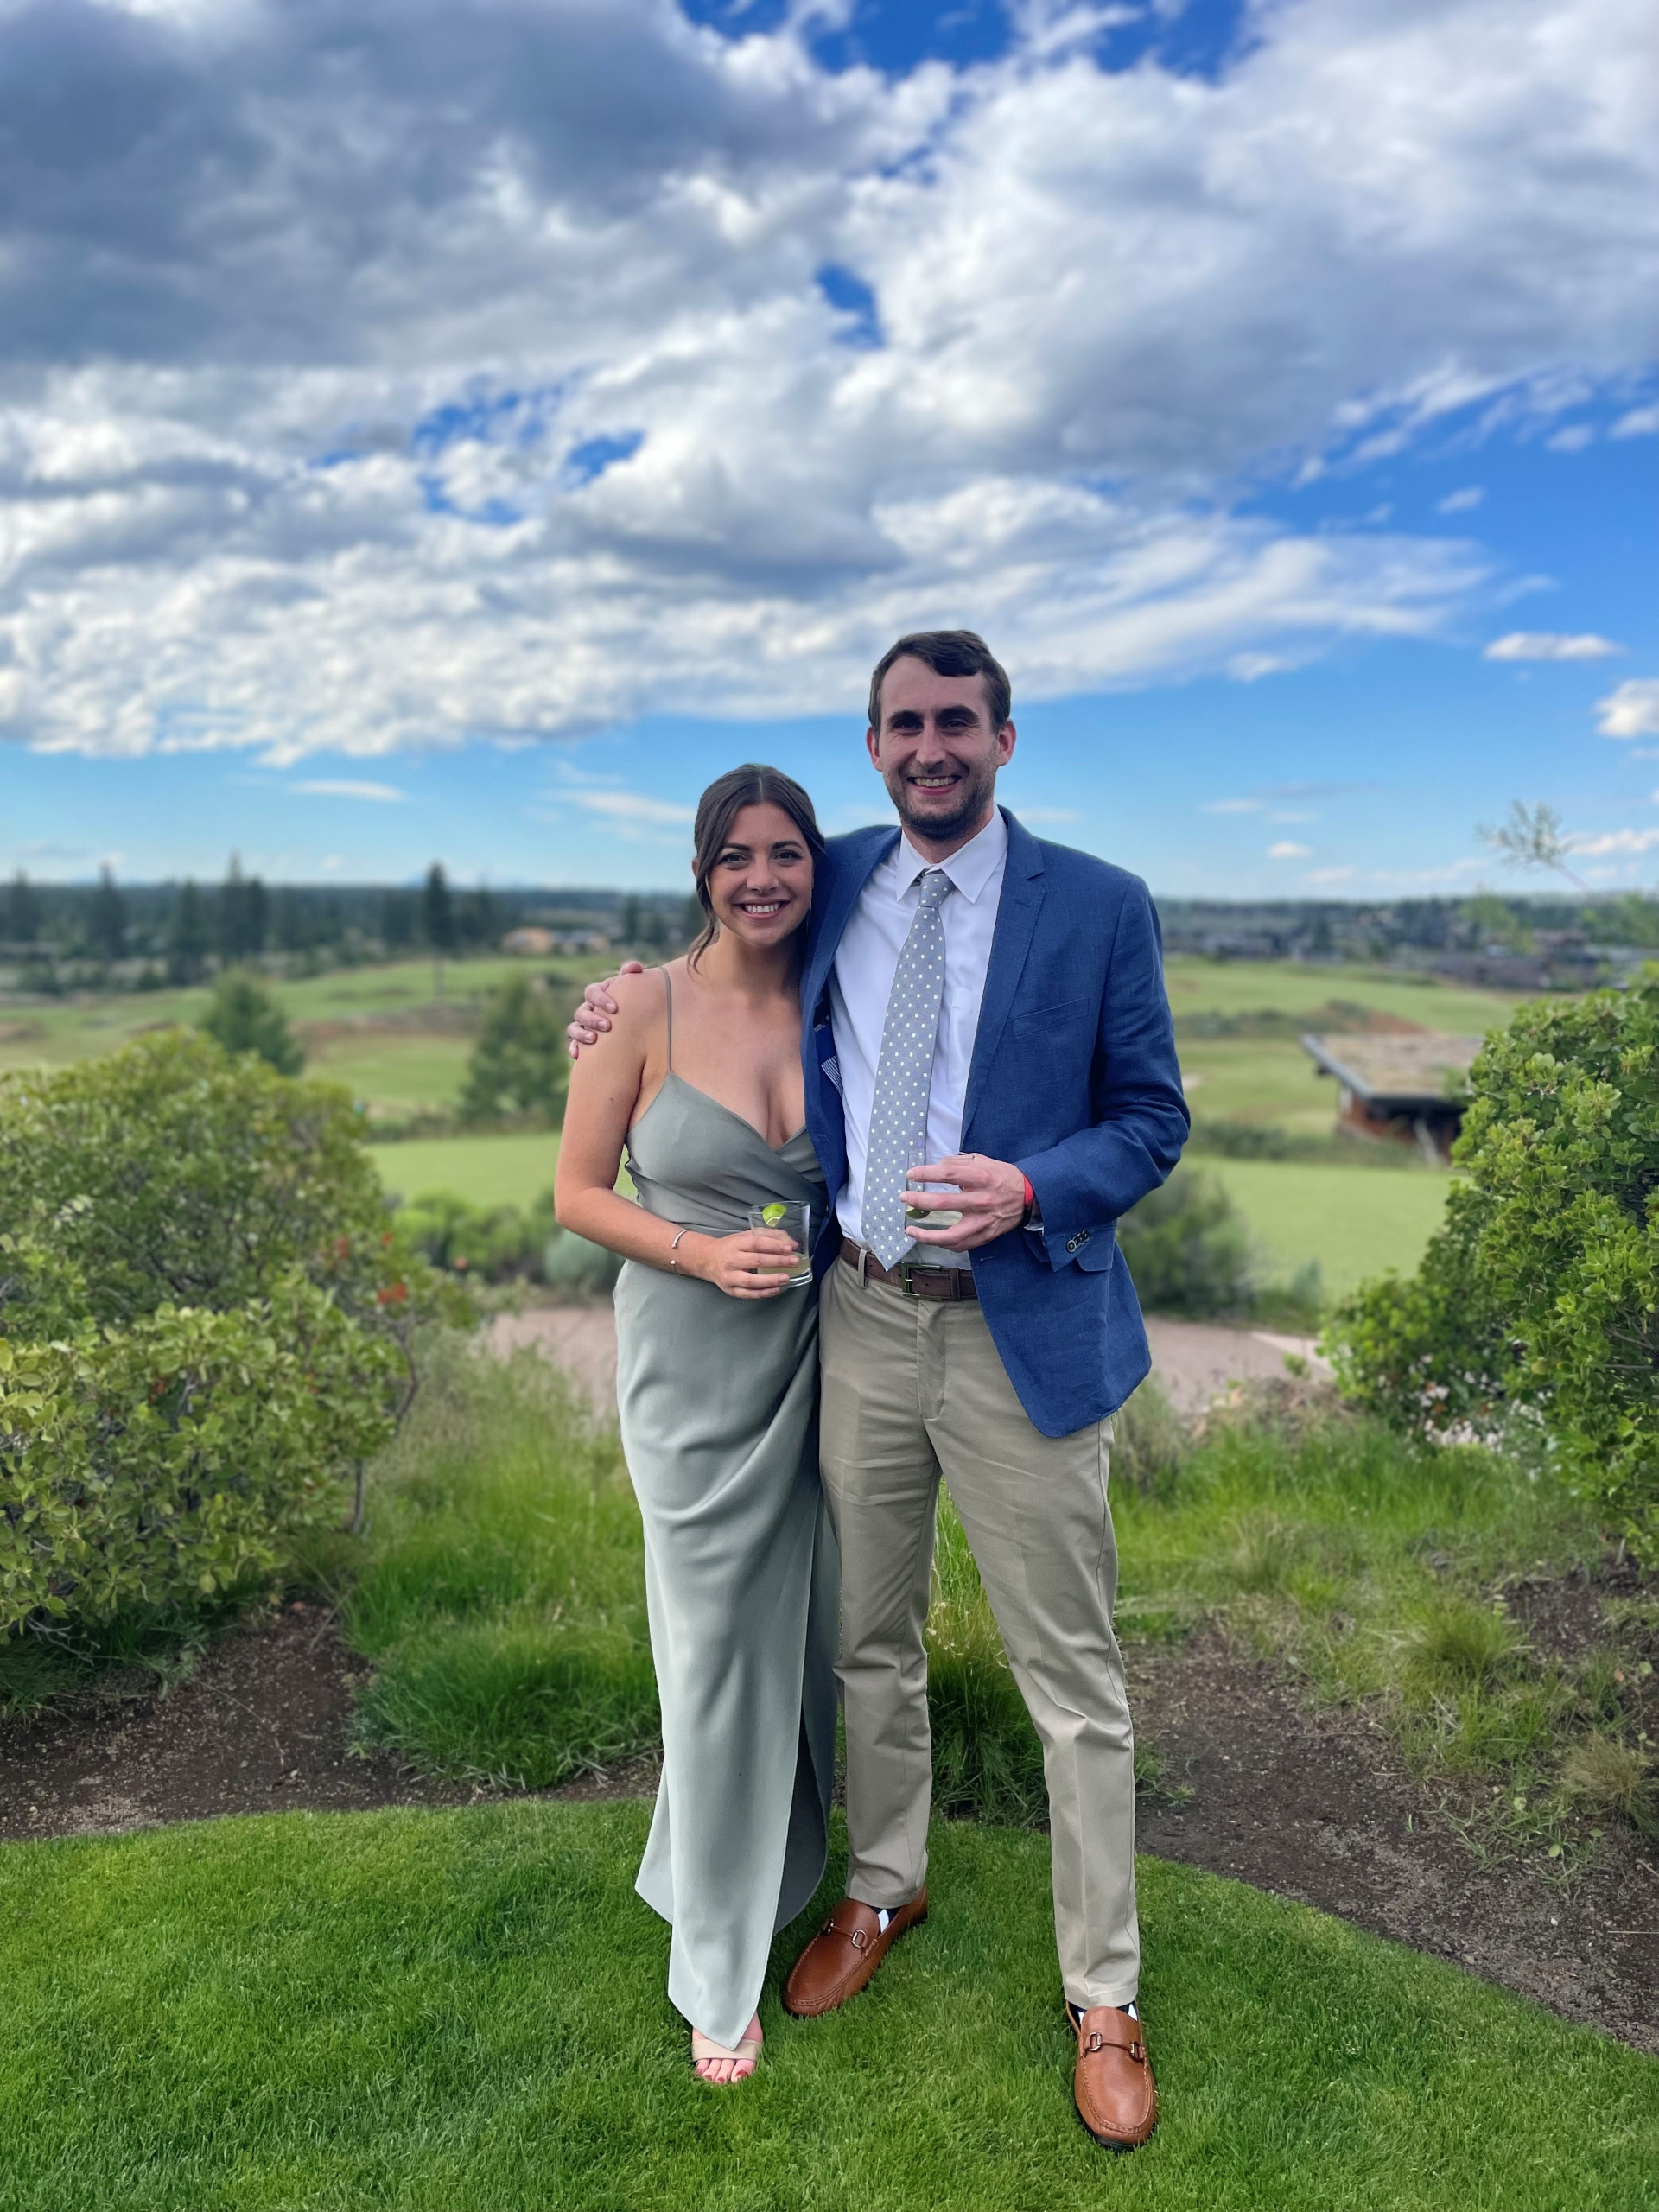 Dash and his girlfriend Abby at their friend’s wedding in Bend, Oregon, this past summer.